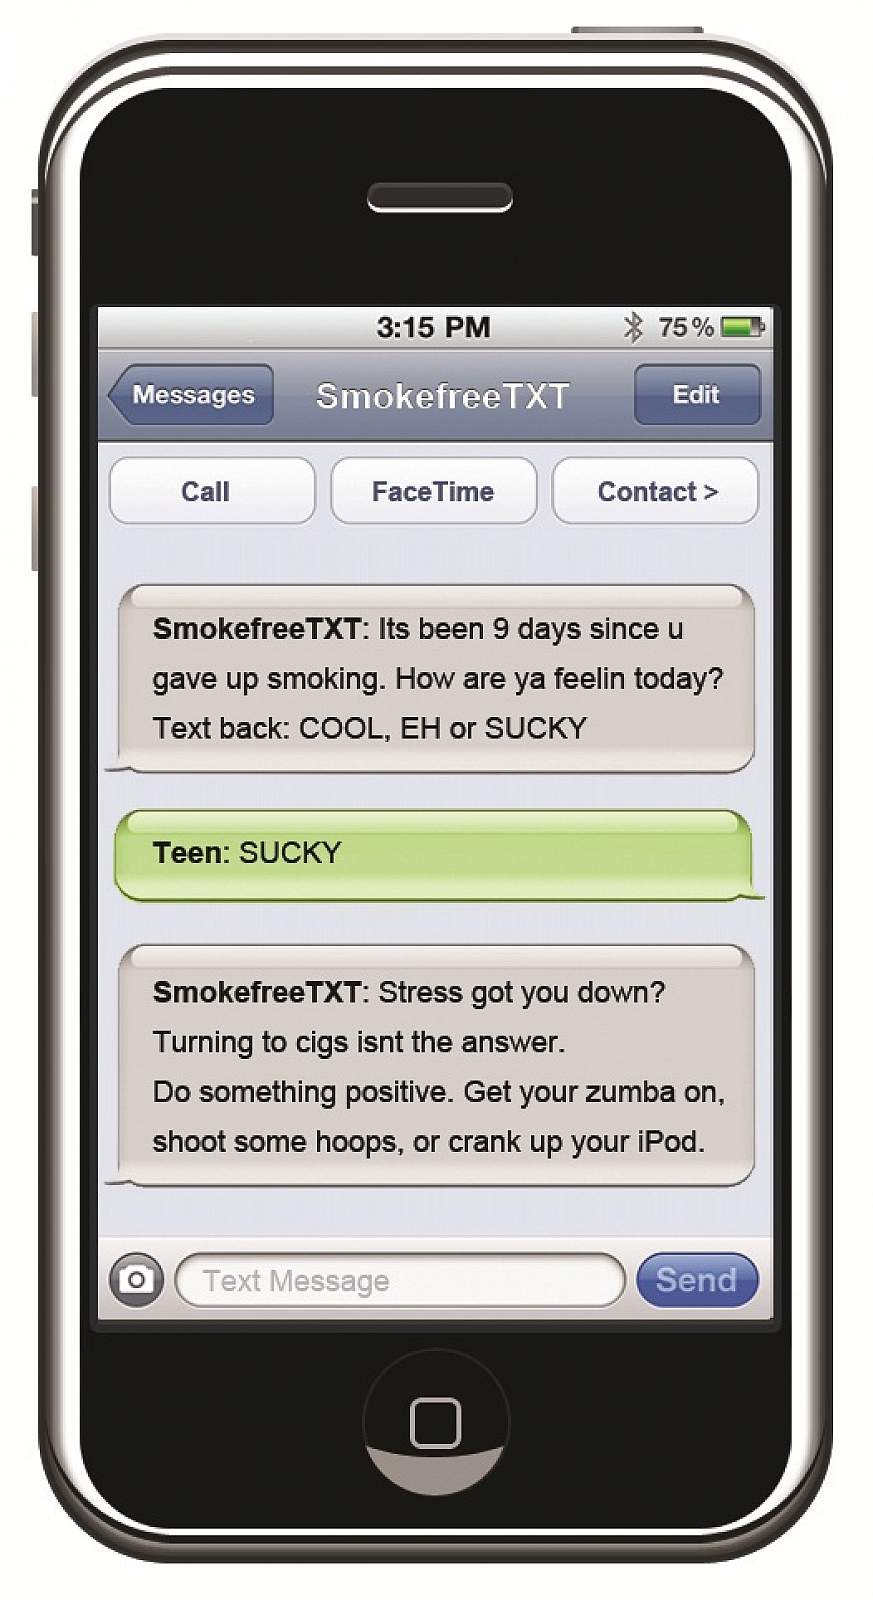 Image of iPhone with quit smoking text messages displayed.